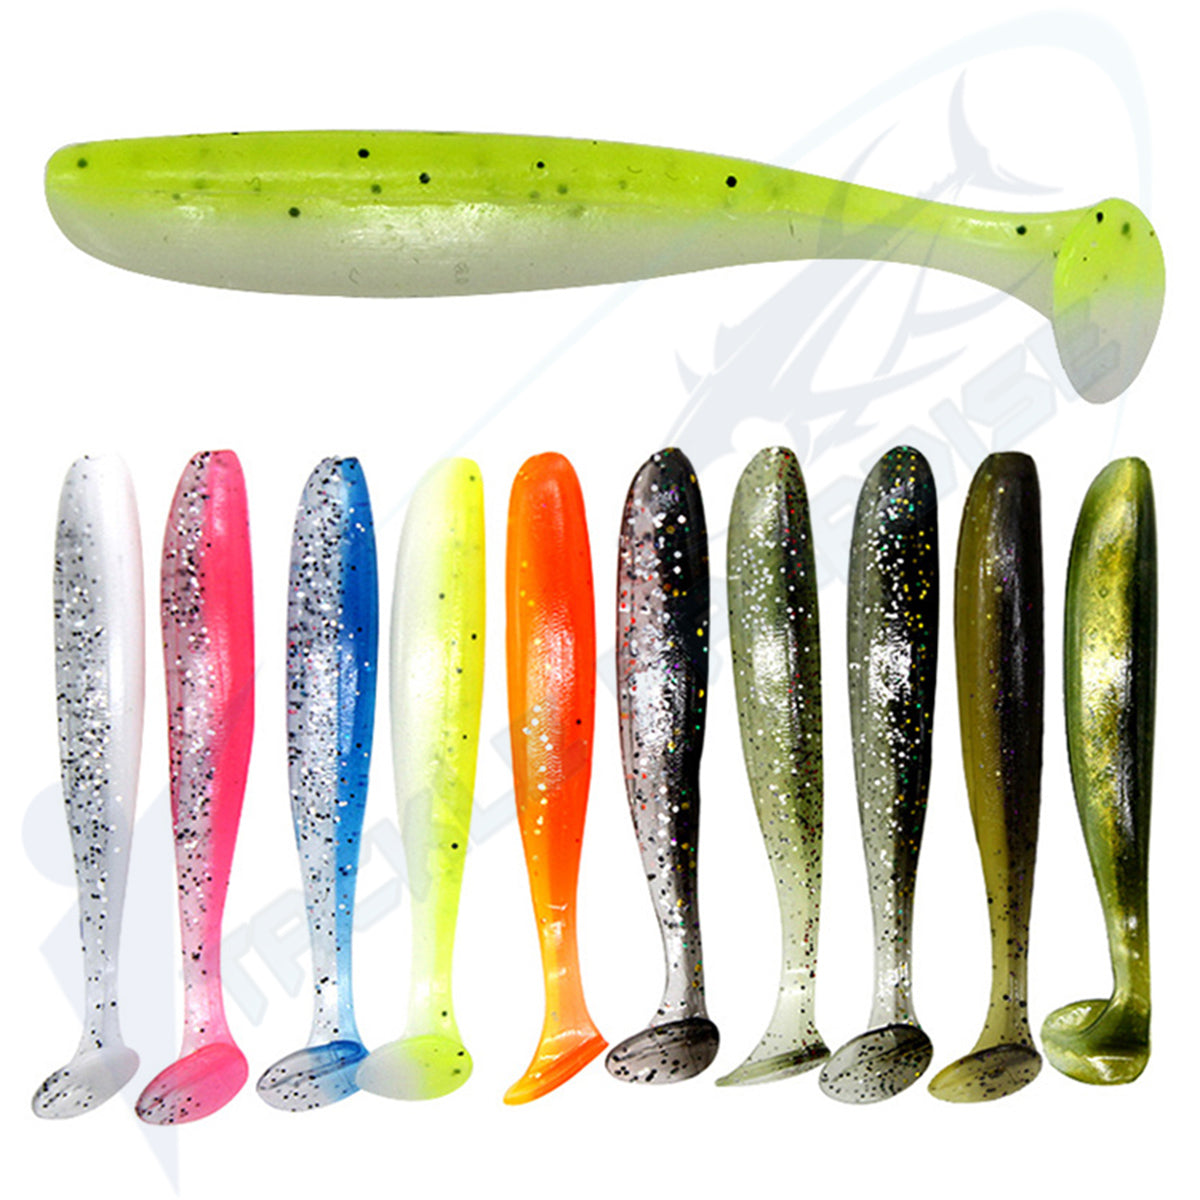 20 Soft Plastic Fishing Lures 70mm Paddle TAIL FLATHEAD Bream Bass